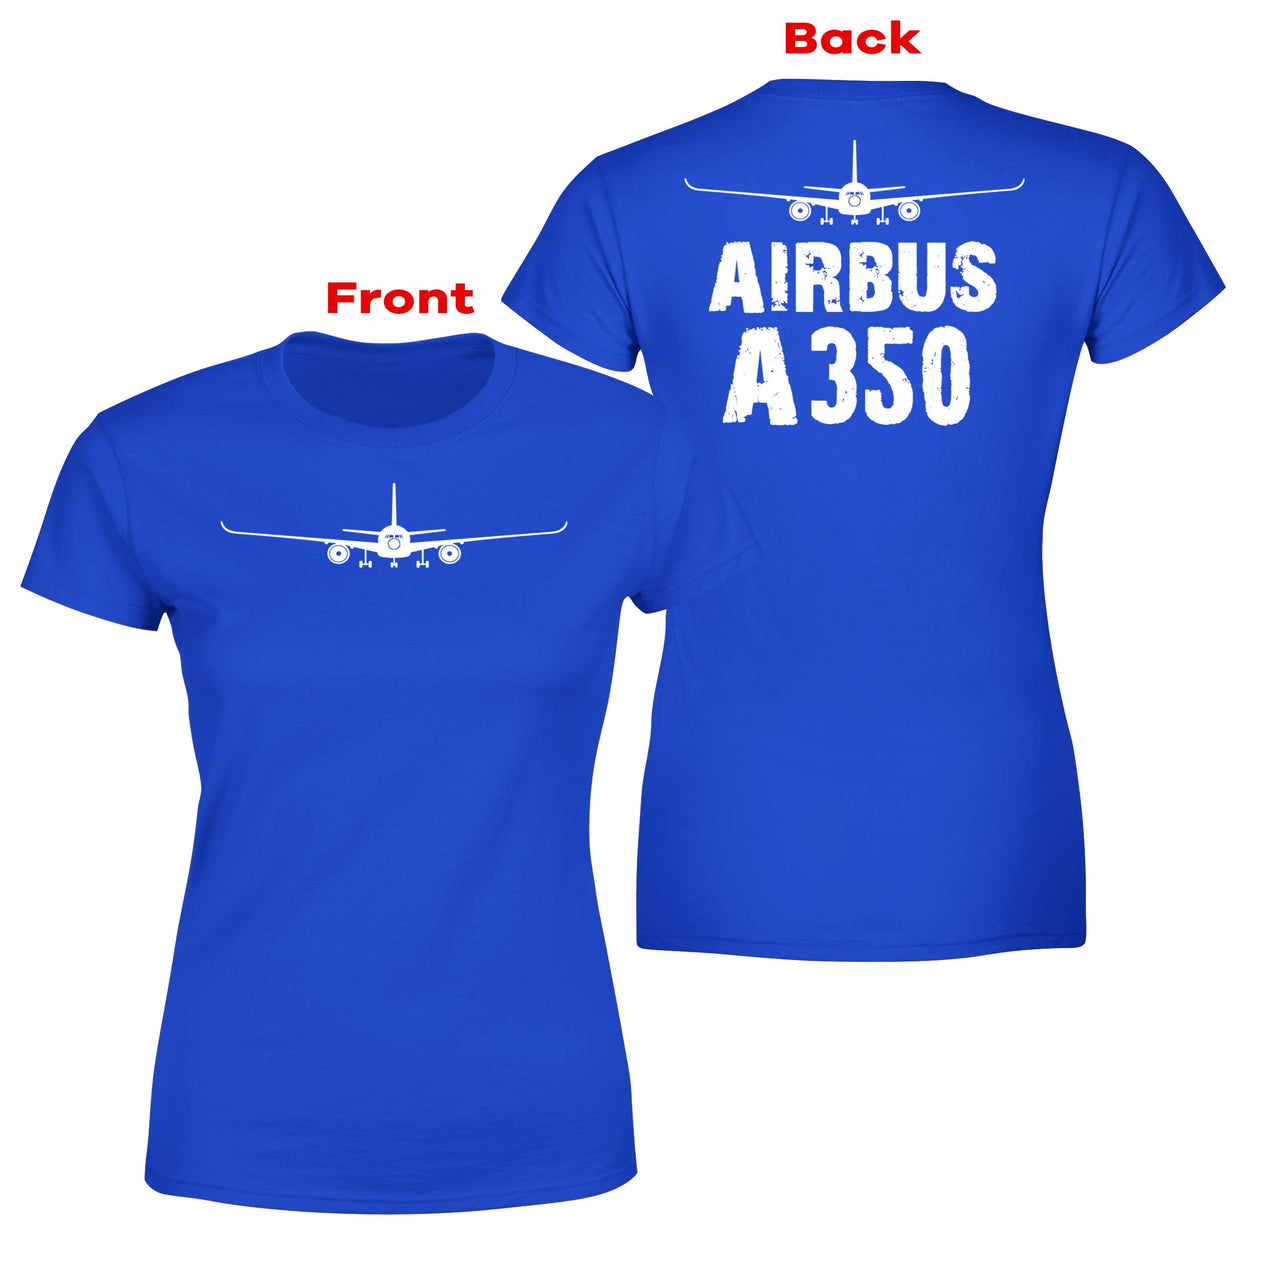 Airbus A350 & Plane Designed Double-Side T-Shirts